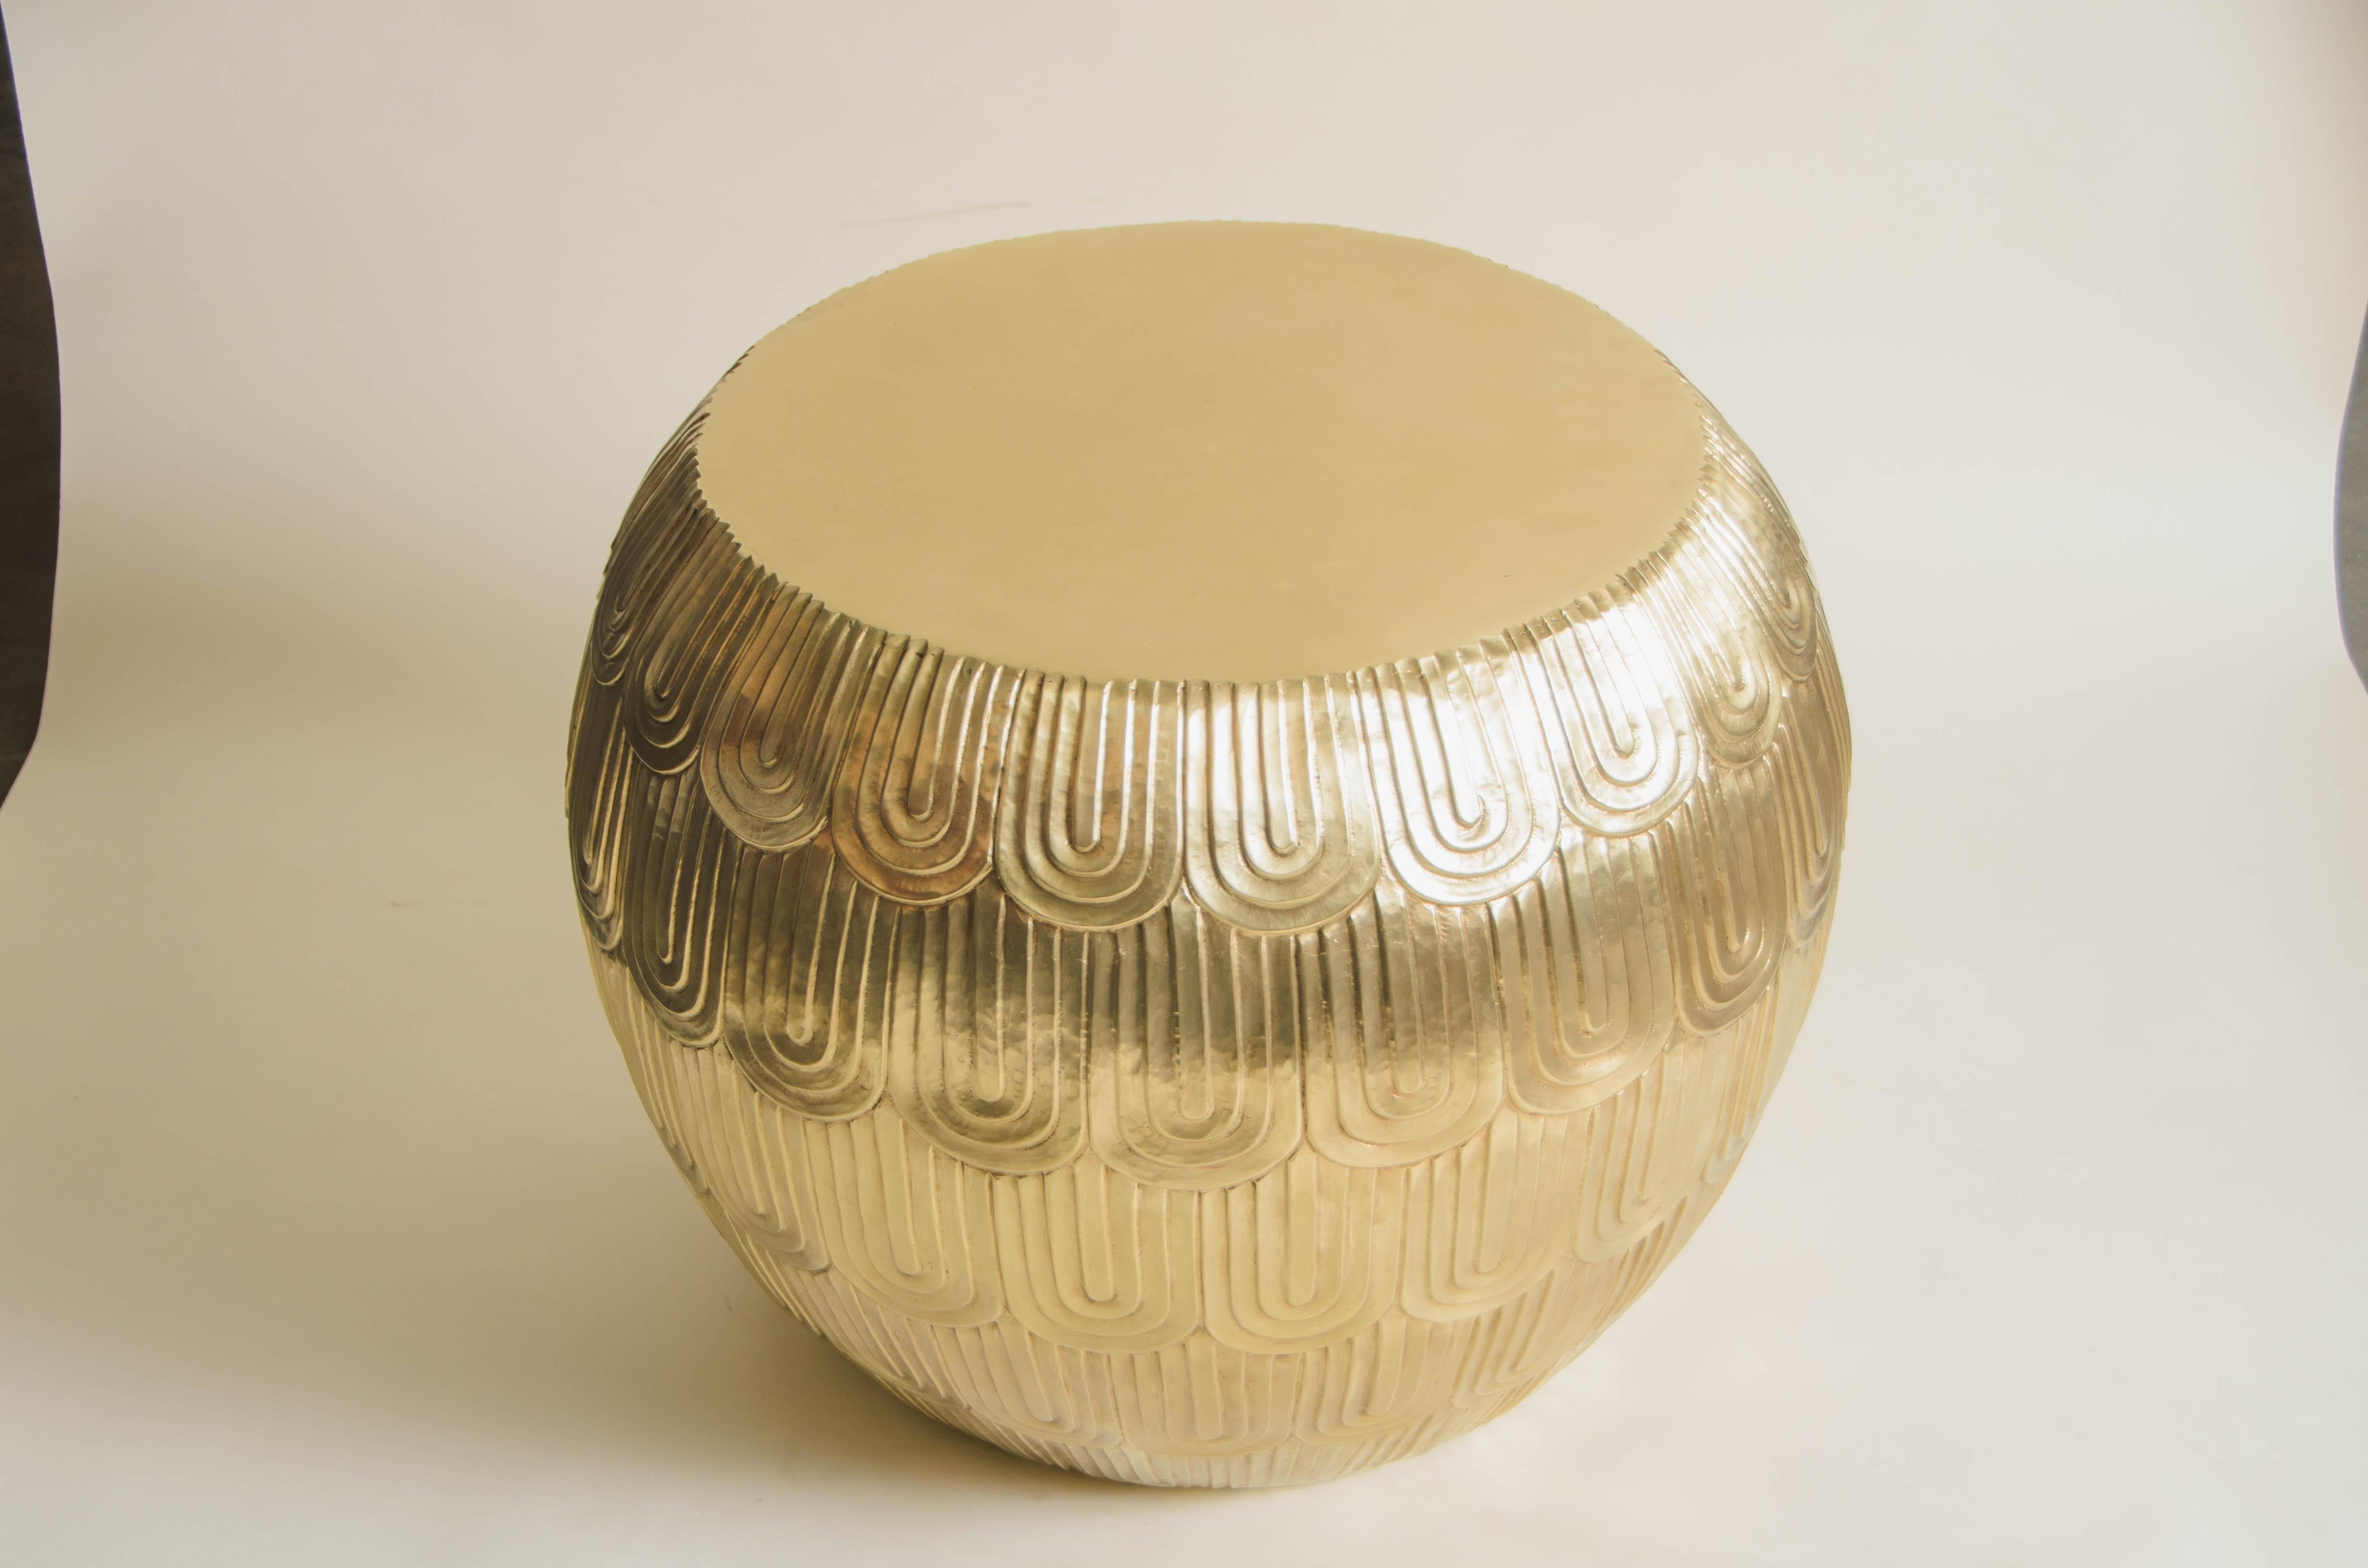 Fish scale design low drumstool
Brass
Hand Repoussé
Limited Edition
Contemporary

Repoussé is the traditional art of hand-hammering decorative relief onto sheet metal. The technique originated around 800 BC between Asia and Europe and in